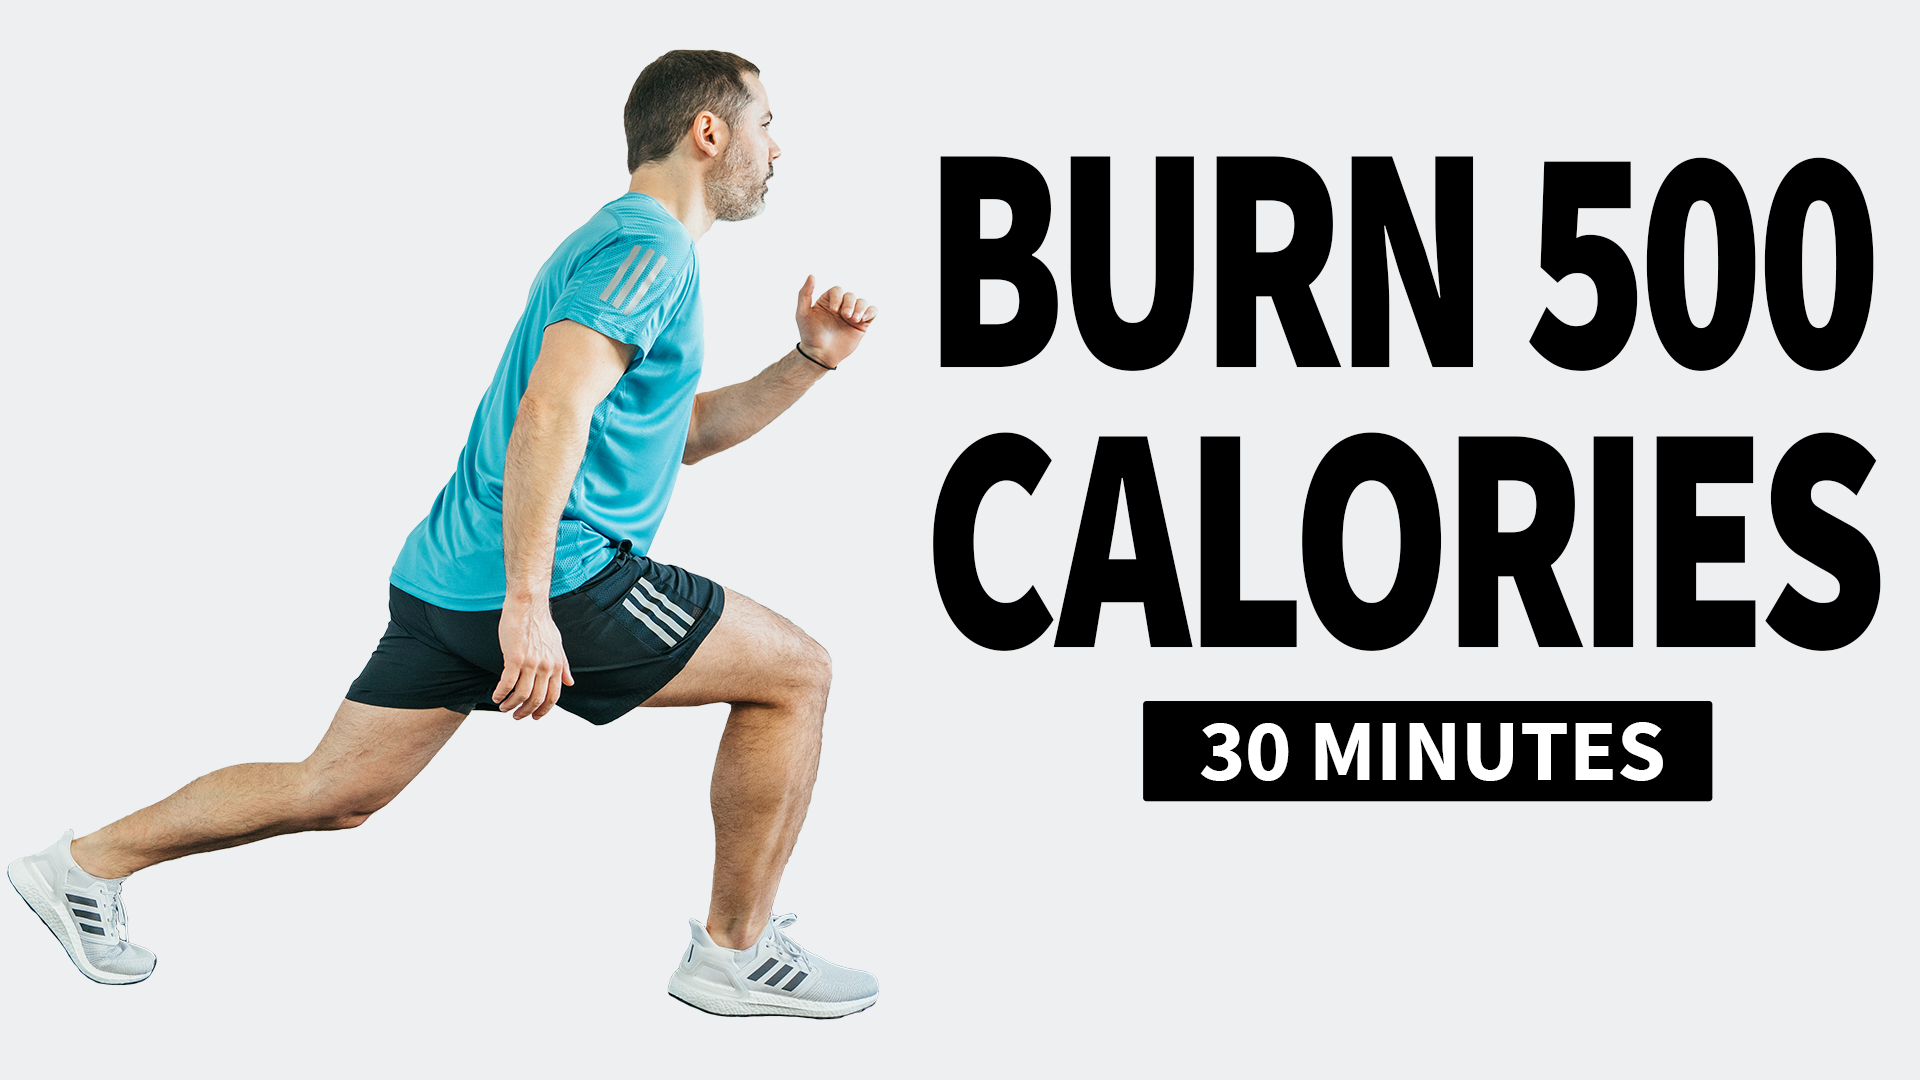 BURN 500 CALORIES with this 30 Minute HIIT Workout